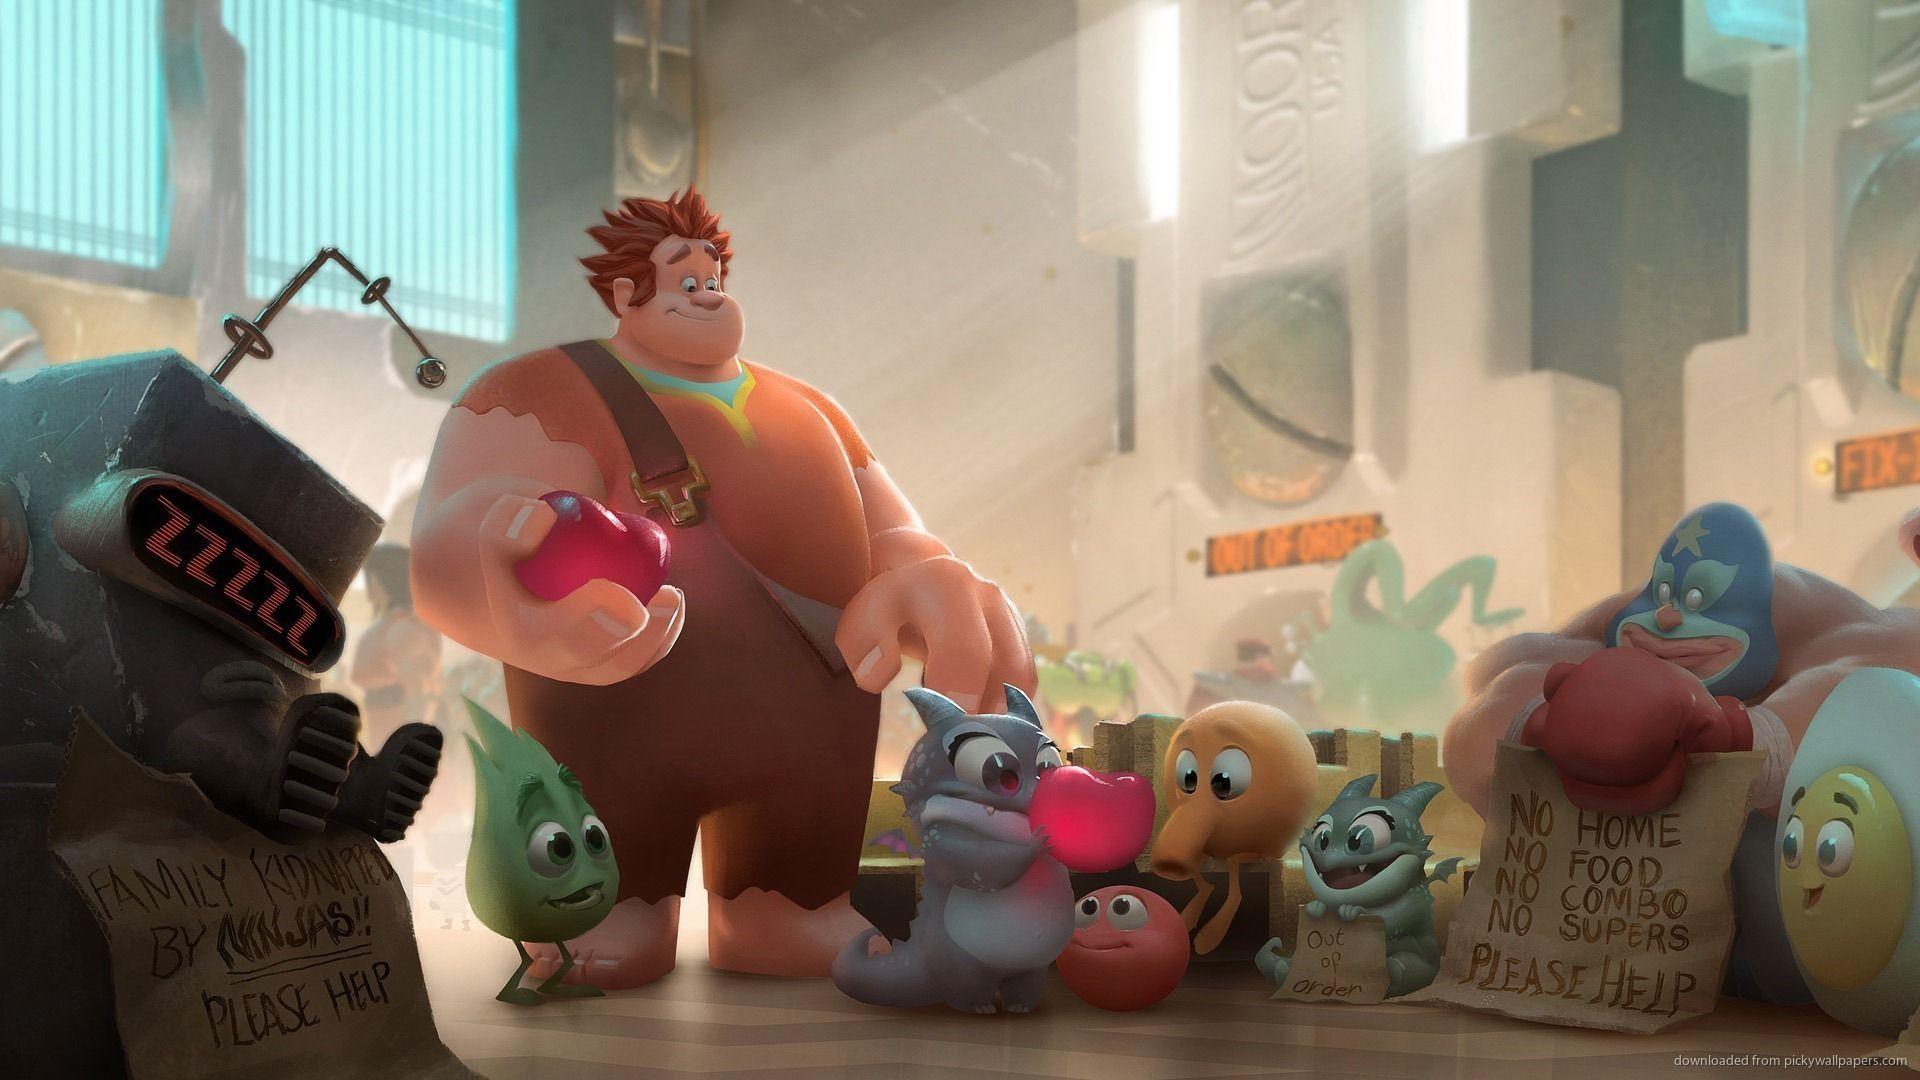 Wreck It Ralph Wallpapers Picture For iPhone, Blackberry, iPad